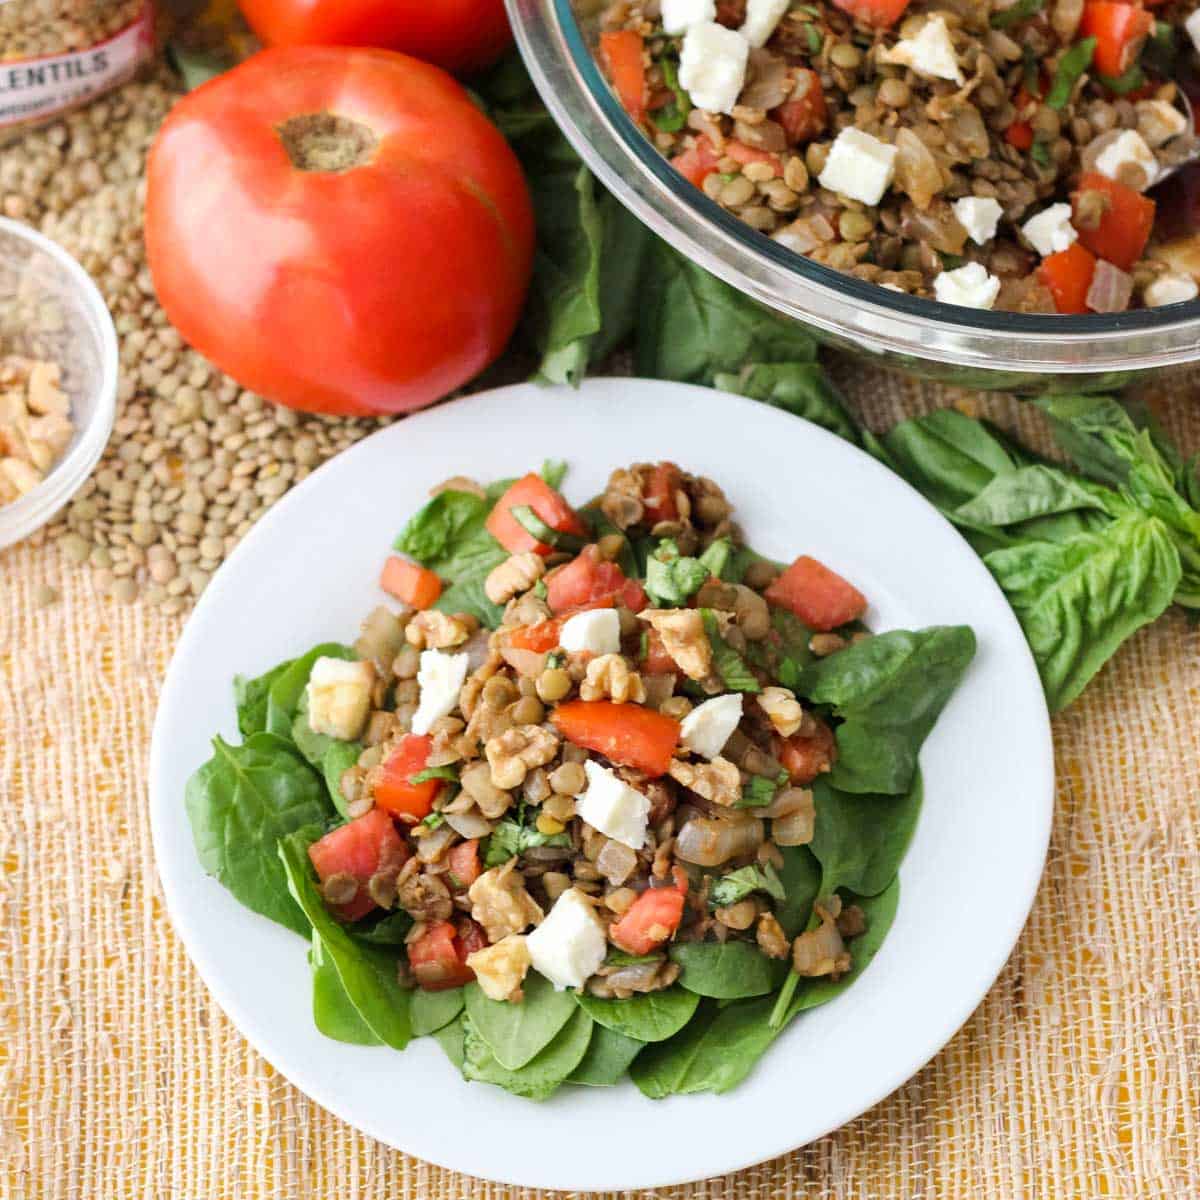 white plate with fresh spinach and lentil salad surrounded by fresh tomatoes, scattered green lentils, and a bowl of caprese lentil salad.